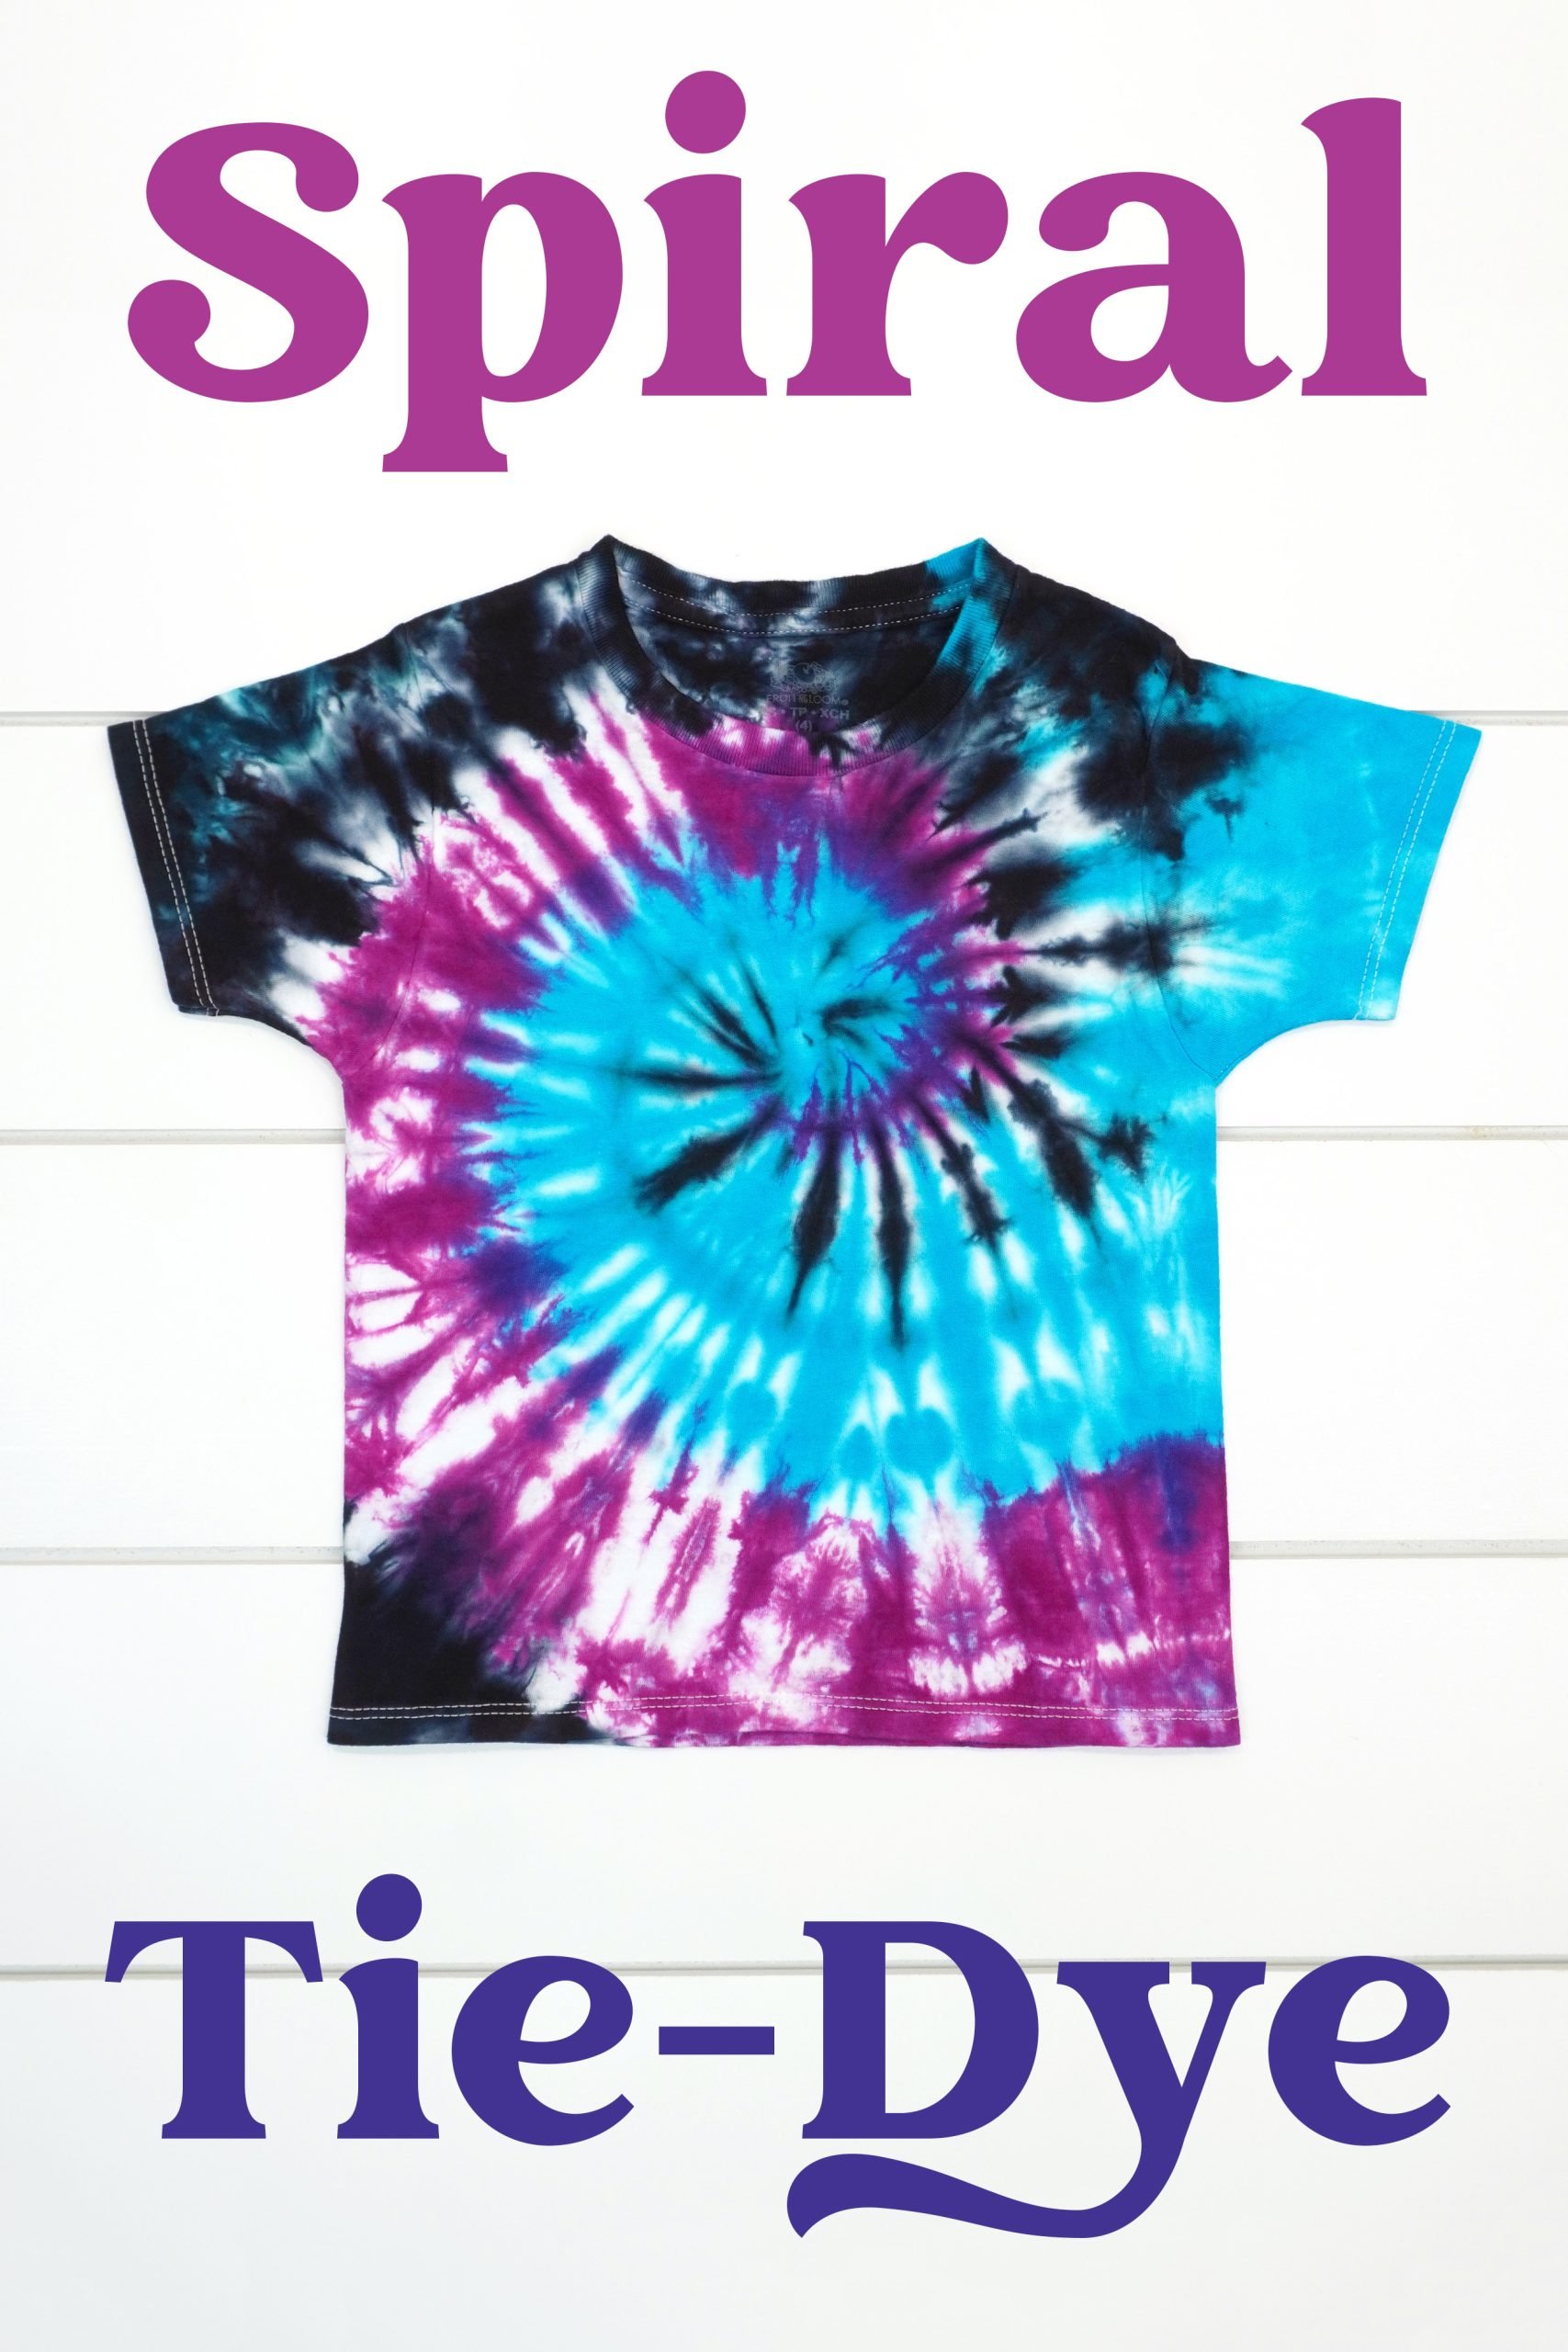 Blue, Purple and Black spiral tie dye shirt on white background with "Spiral Tie Dye" text